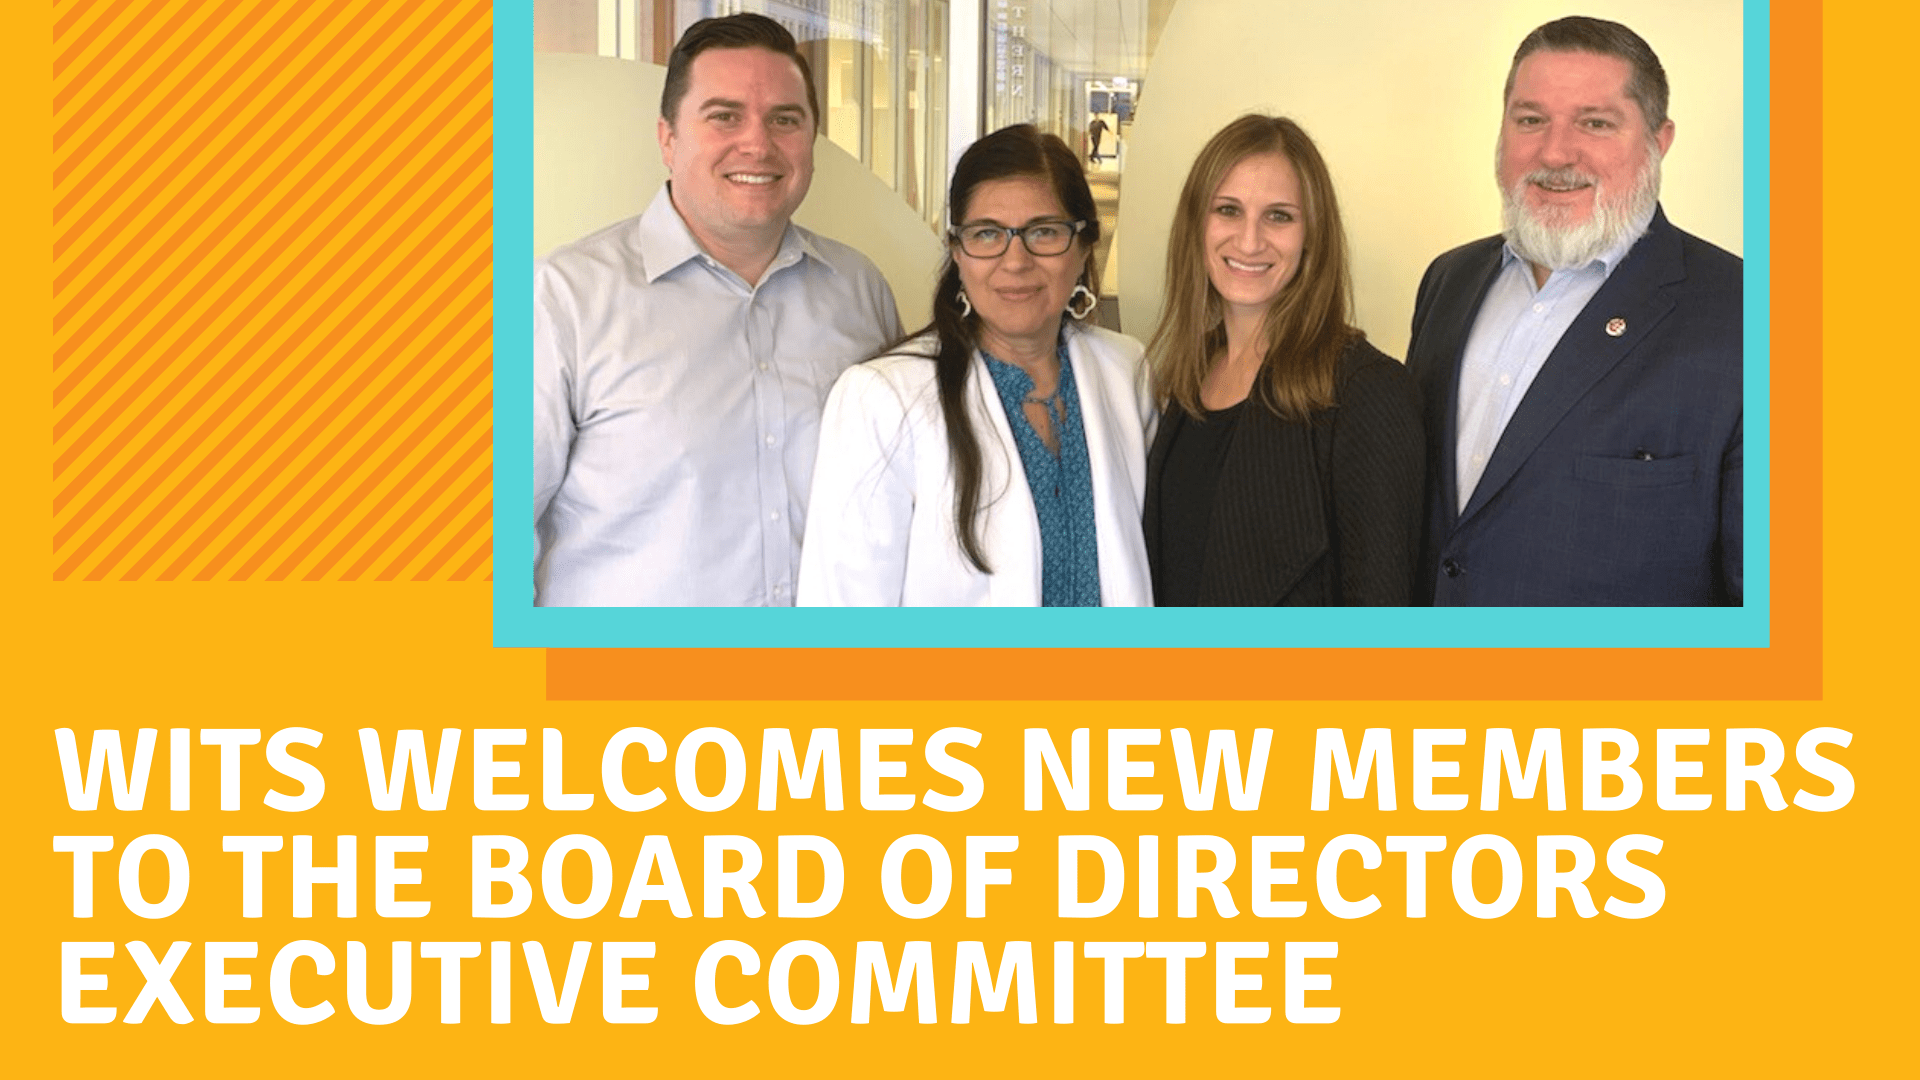 NIA Announces New 20202021 Executive Committee and Board of Directors Officers - NIA